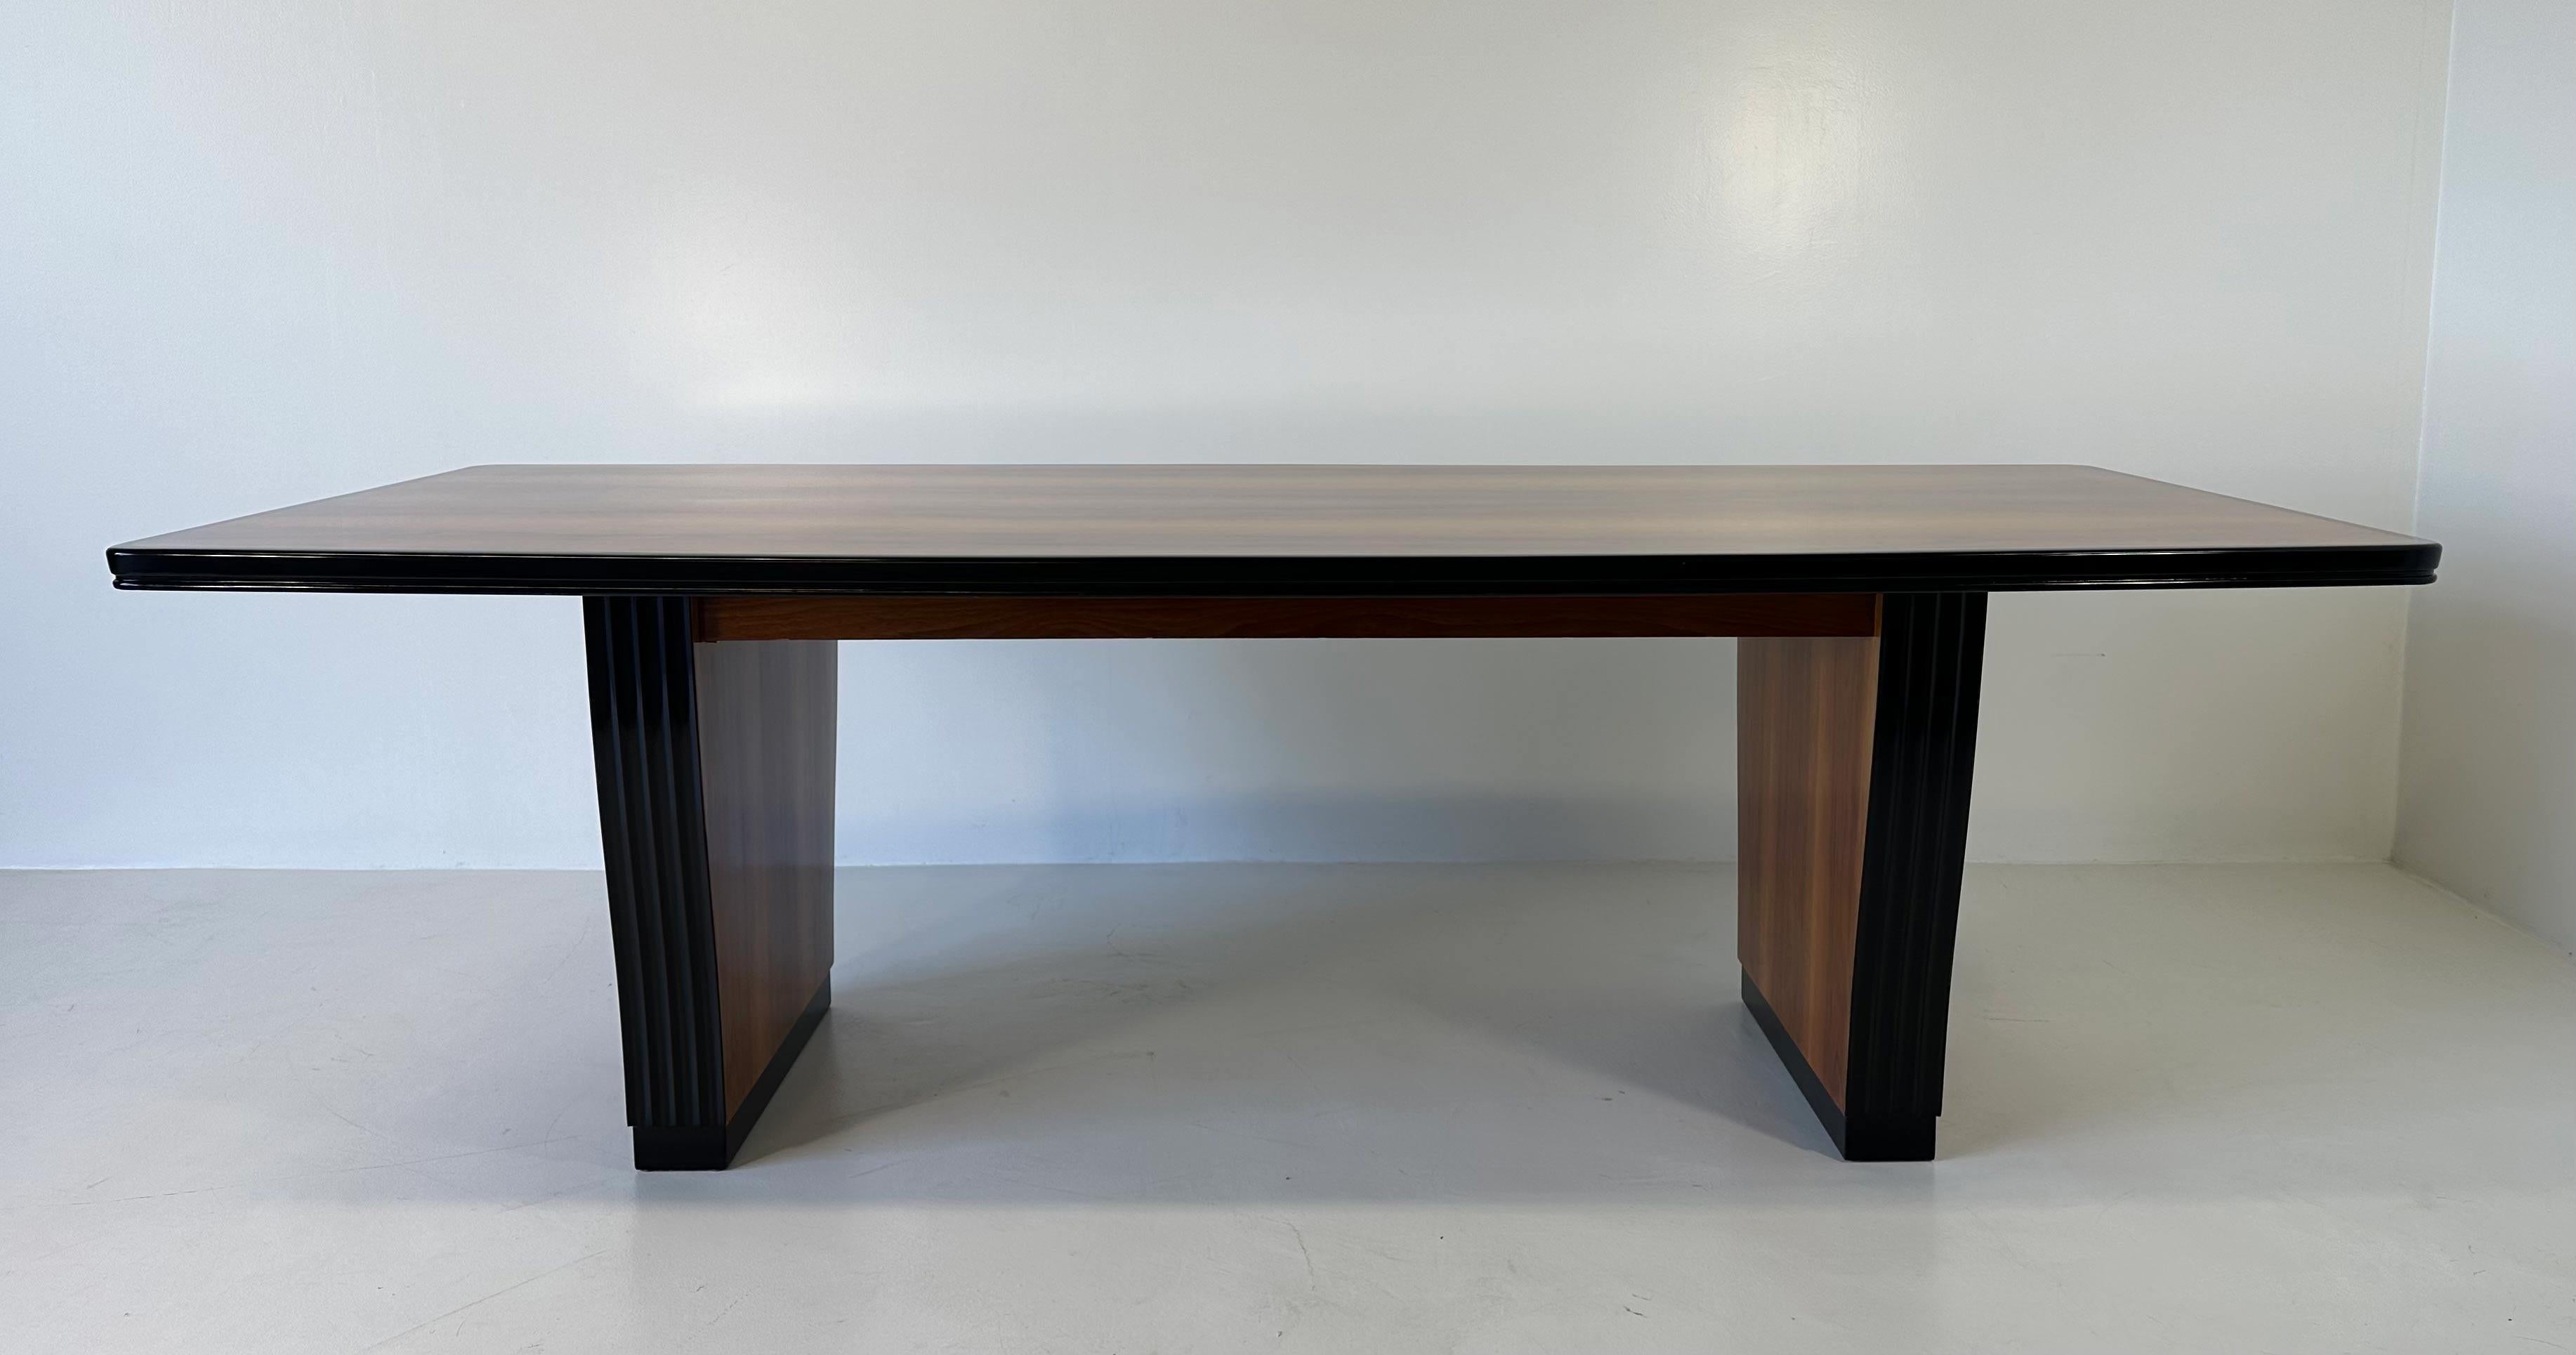 This Art Deco table was produced in Italy in the 1930s. 
It is completely made of walnut wood, framed by black lacquered profiles. 
Completely restored.